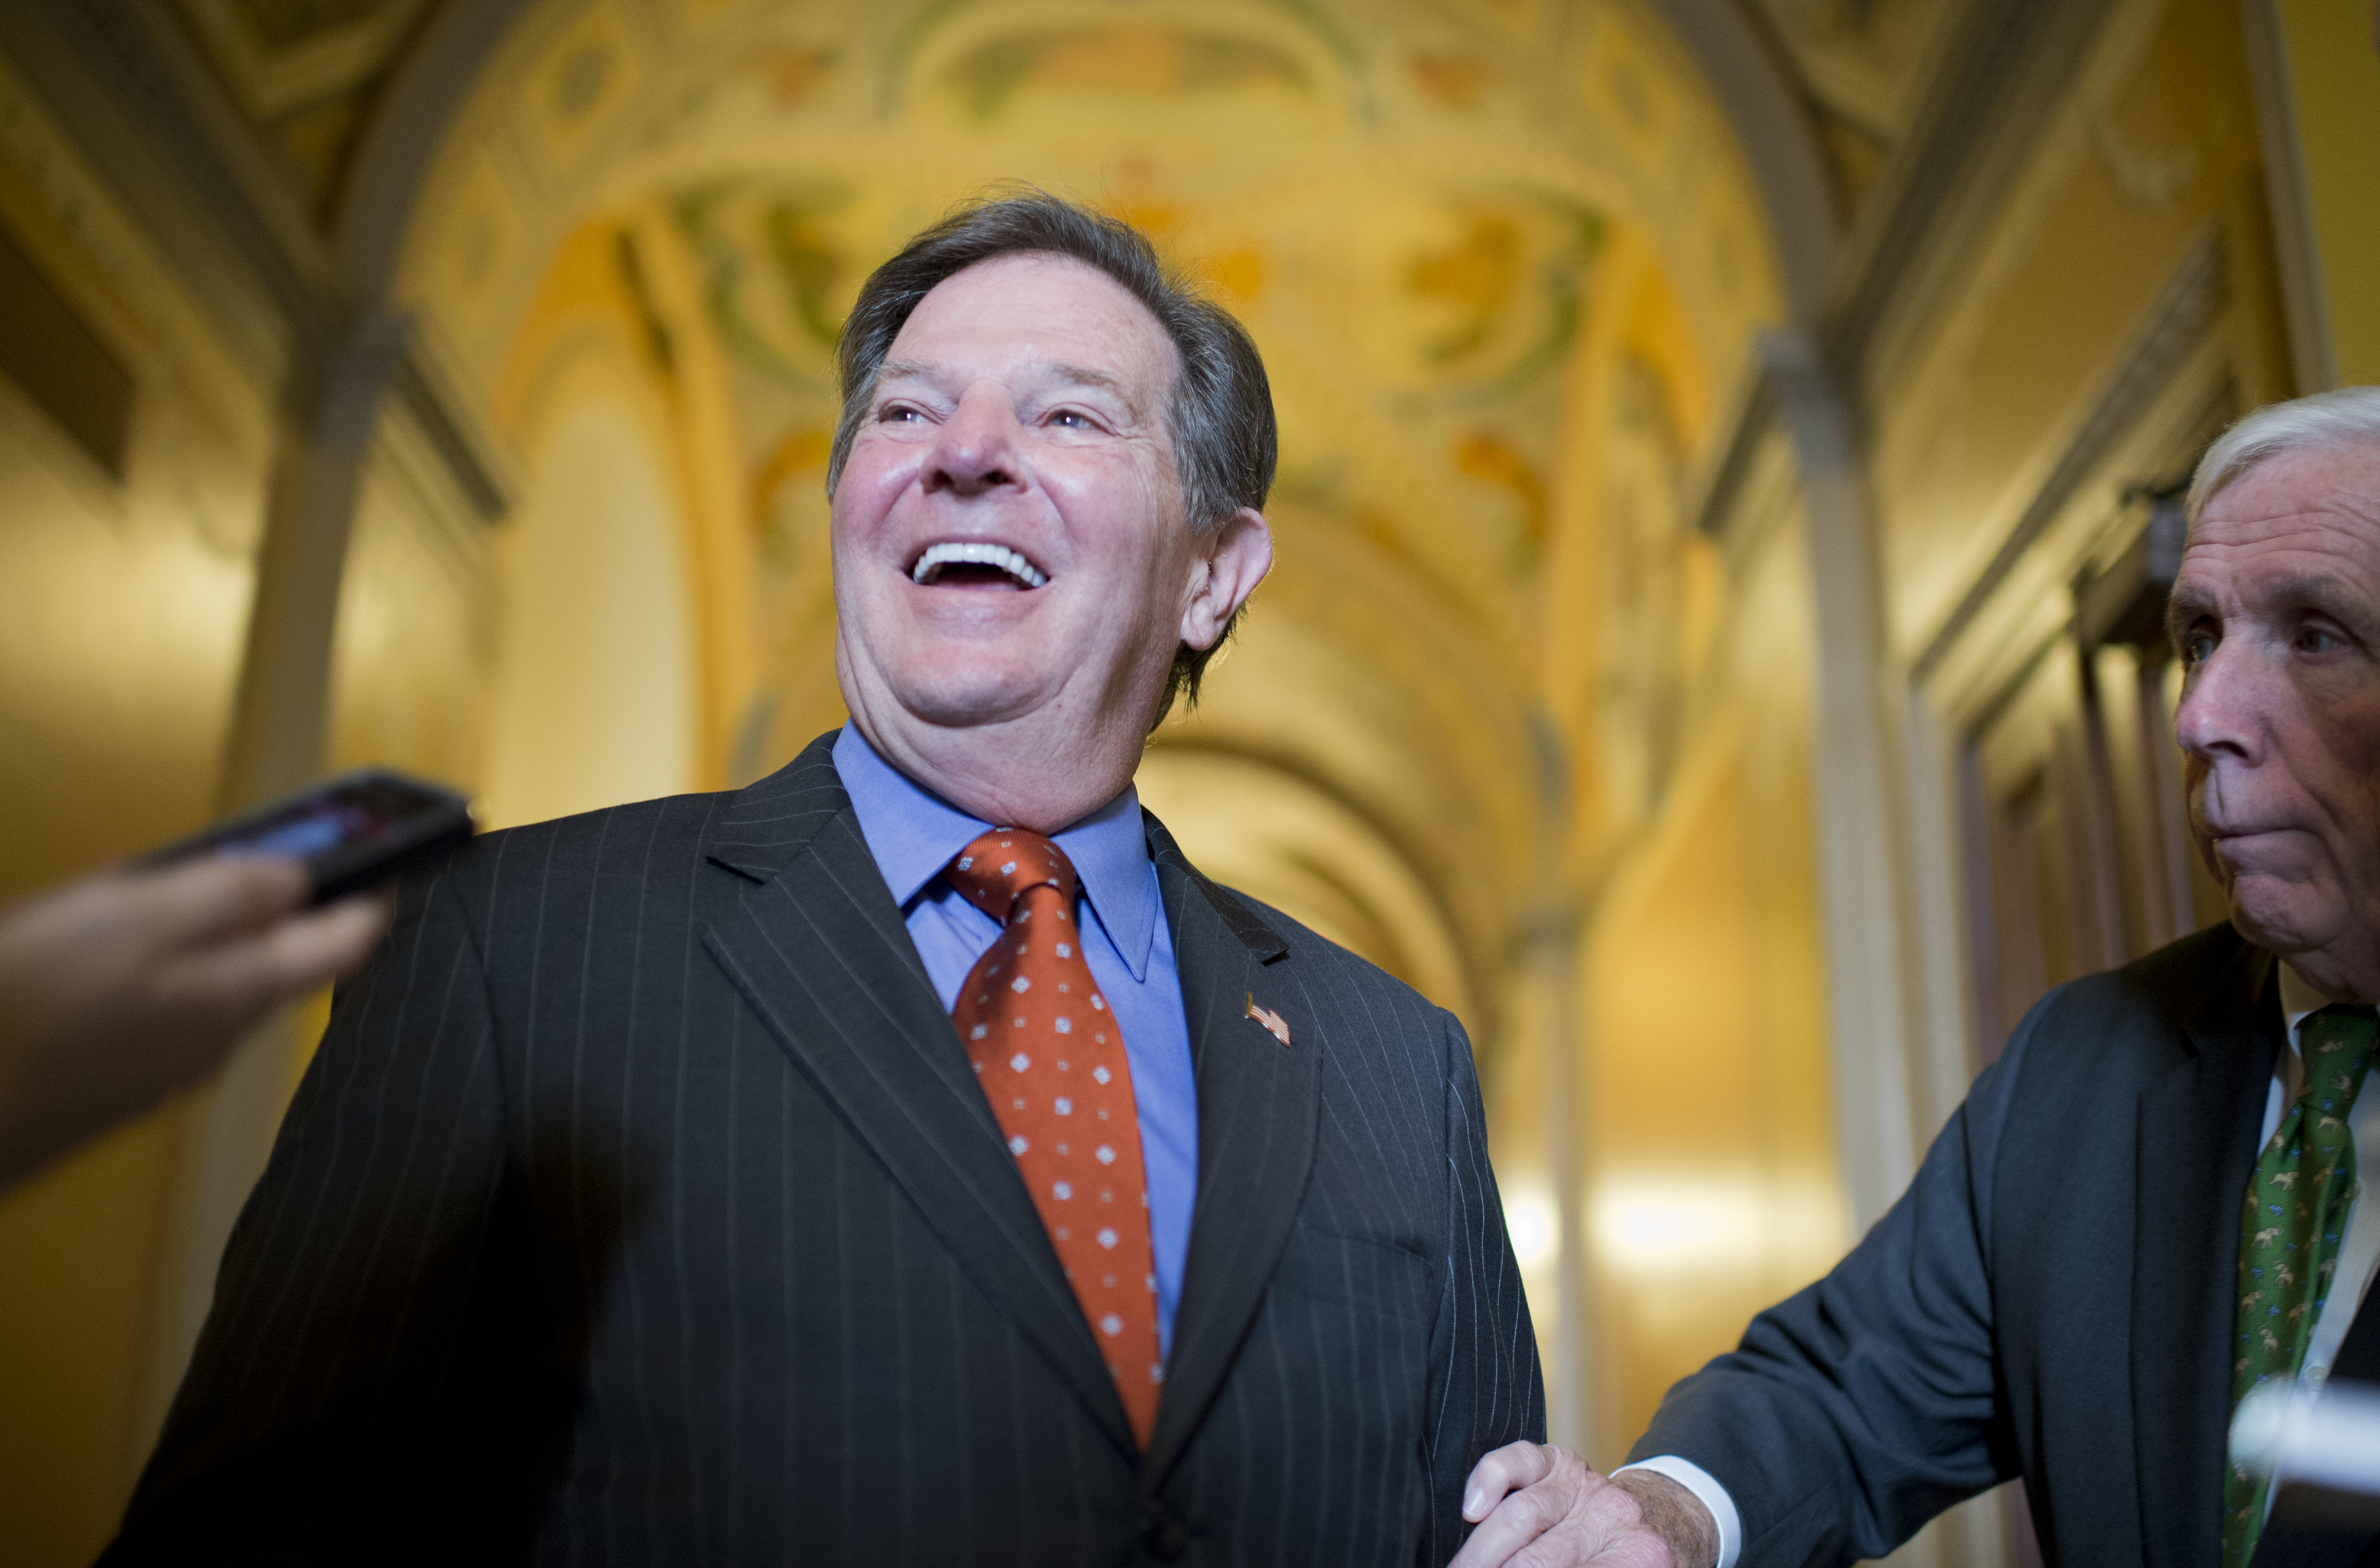 Former Rep. Tom Delay, R-Texas, talks with reporters after a lunch meeting of the Texas Republicans in the capitol on the day his conviction for corruption was overturned by a Texas appeals court. (Tom Williams&mdash;CQ-Roll Call,Inc.)